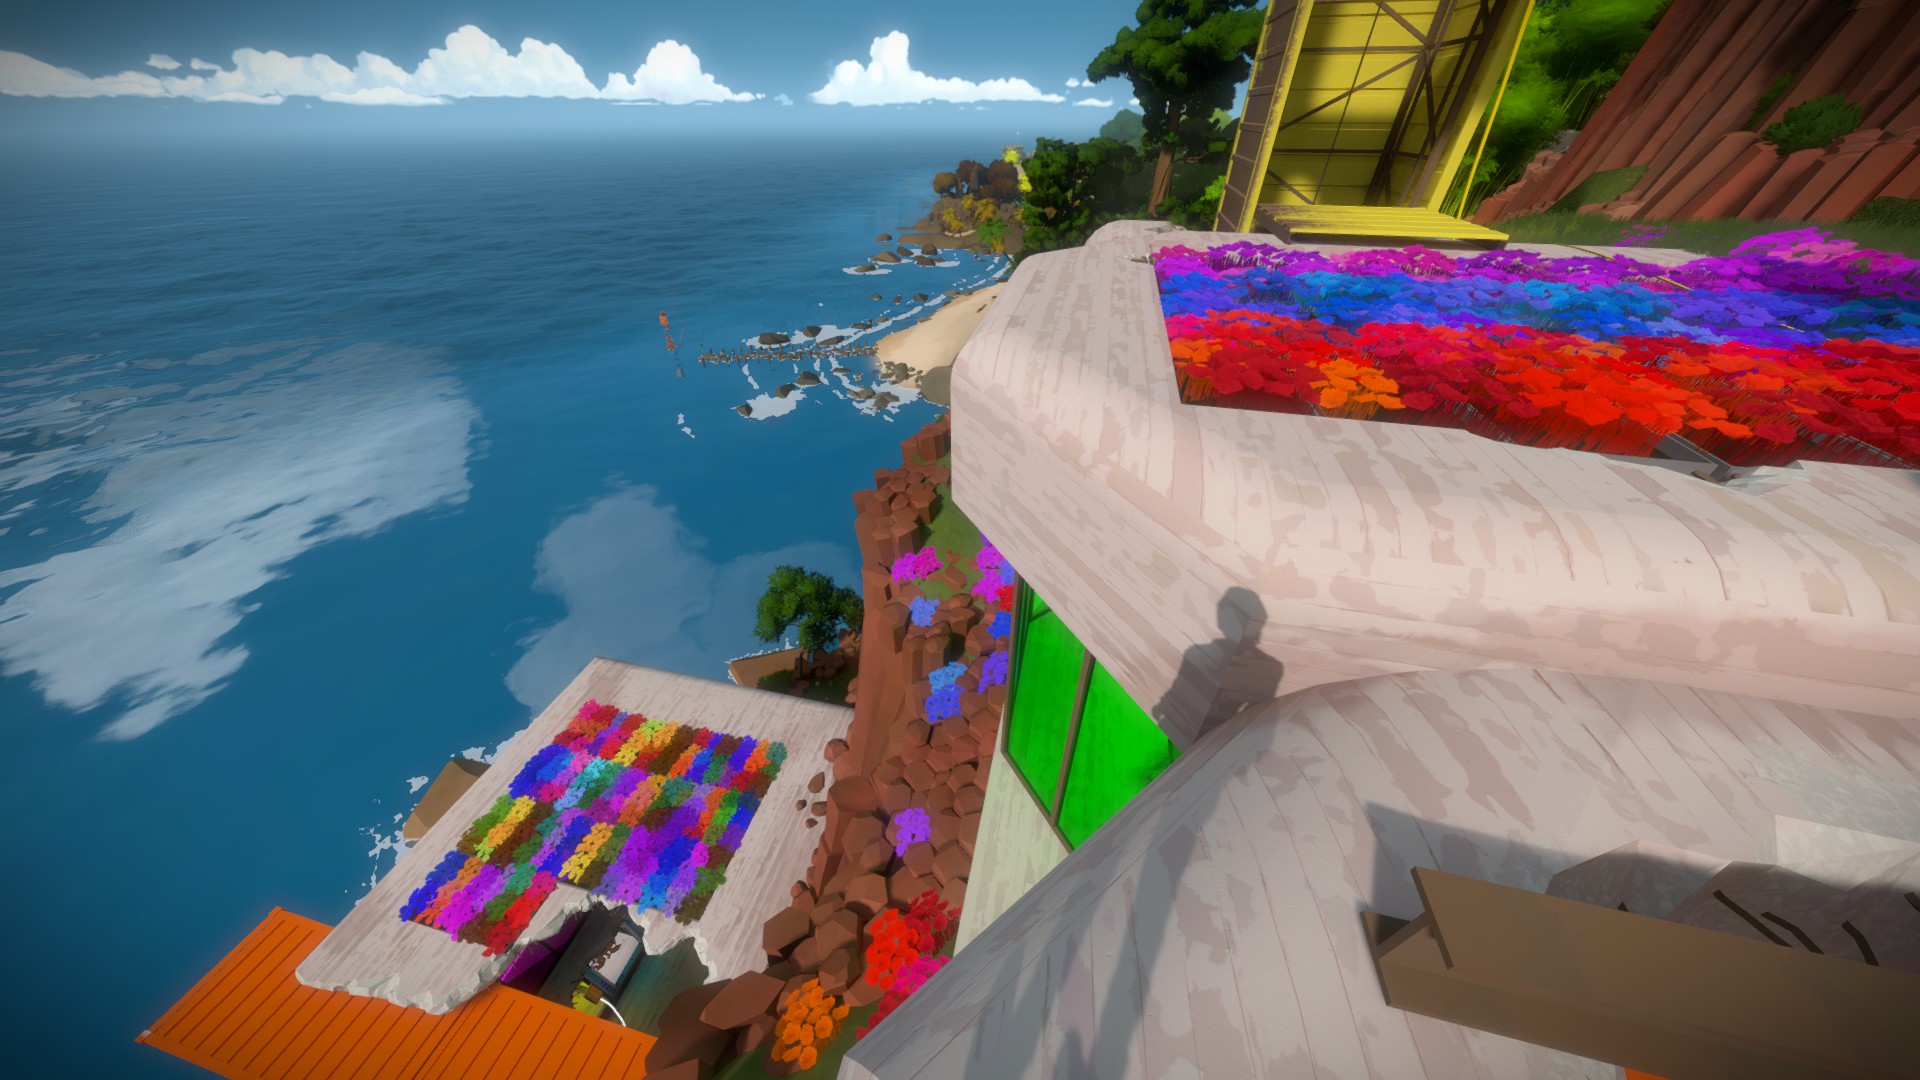 The top of Color Lab features colored rows of flowers. These rows extend to the rocky path below.